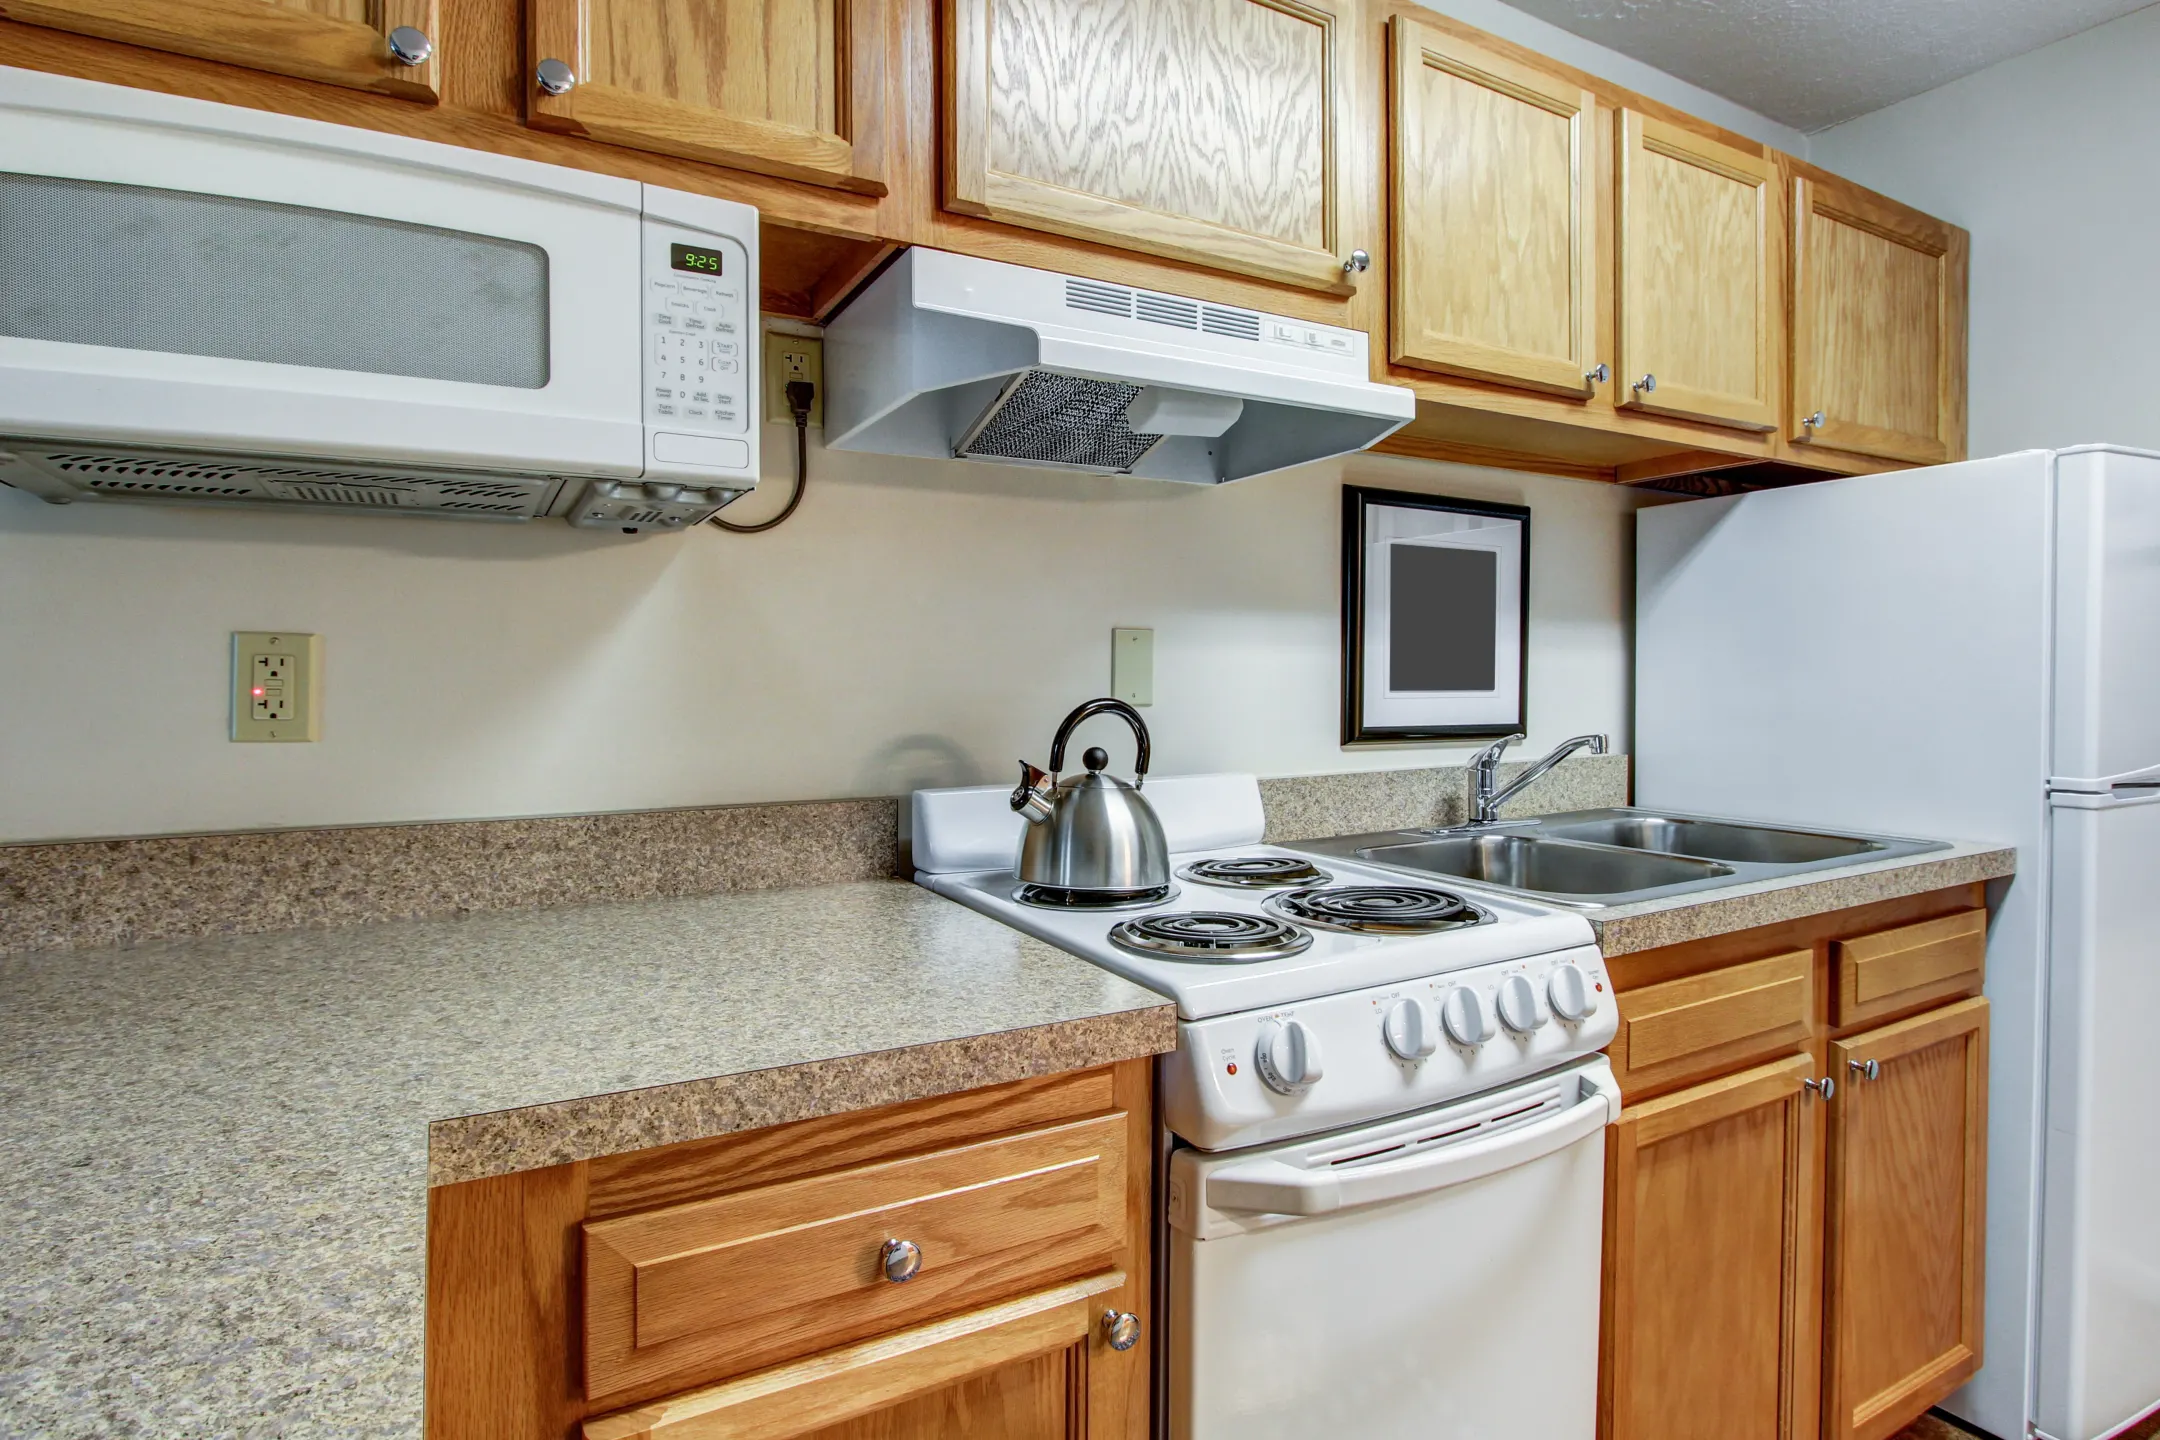 Kitchen - Peppertree Apartments - Niles, OH